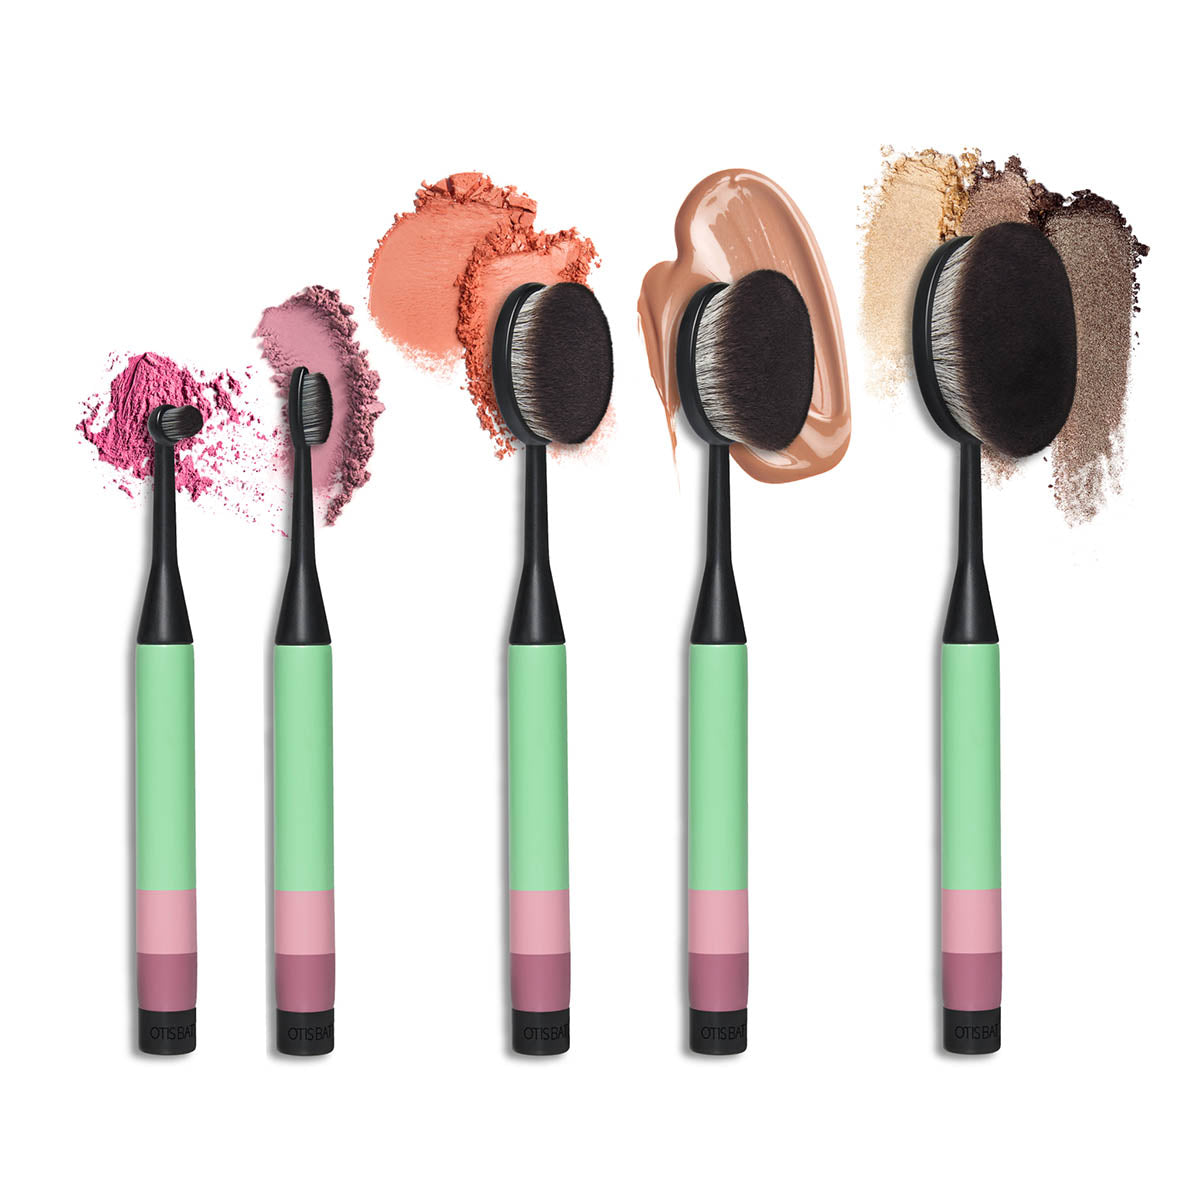 Otis Batterbee Professional Oval Makeup Brush Set – The oval shapes blend bronzer and even tanning products.